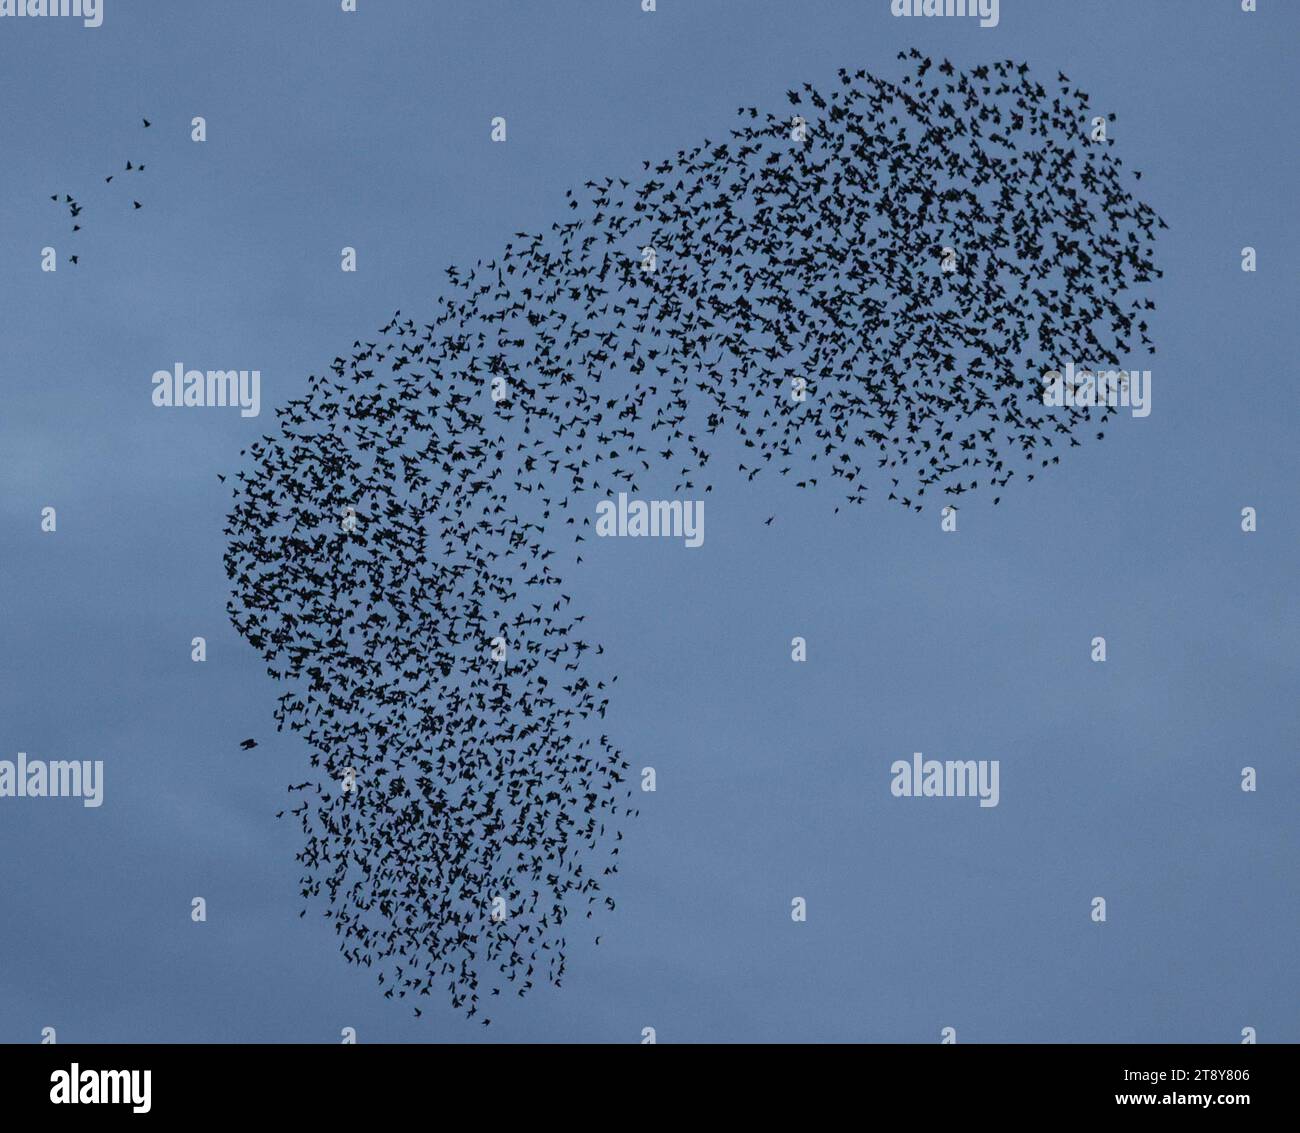 Aghalee, County Antrim, Northern Ireland, UK. 21st Nov 2023. UK autumn murmuration - a murmuration of starlings at dusk in November being attacked by a bird of prey. Credit: David Hunter/Alamy Live News. Stock Photo